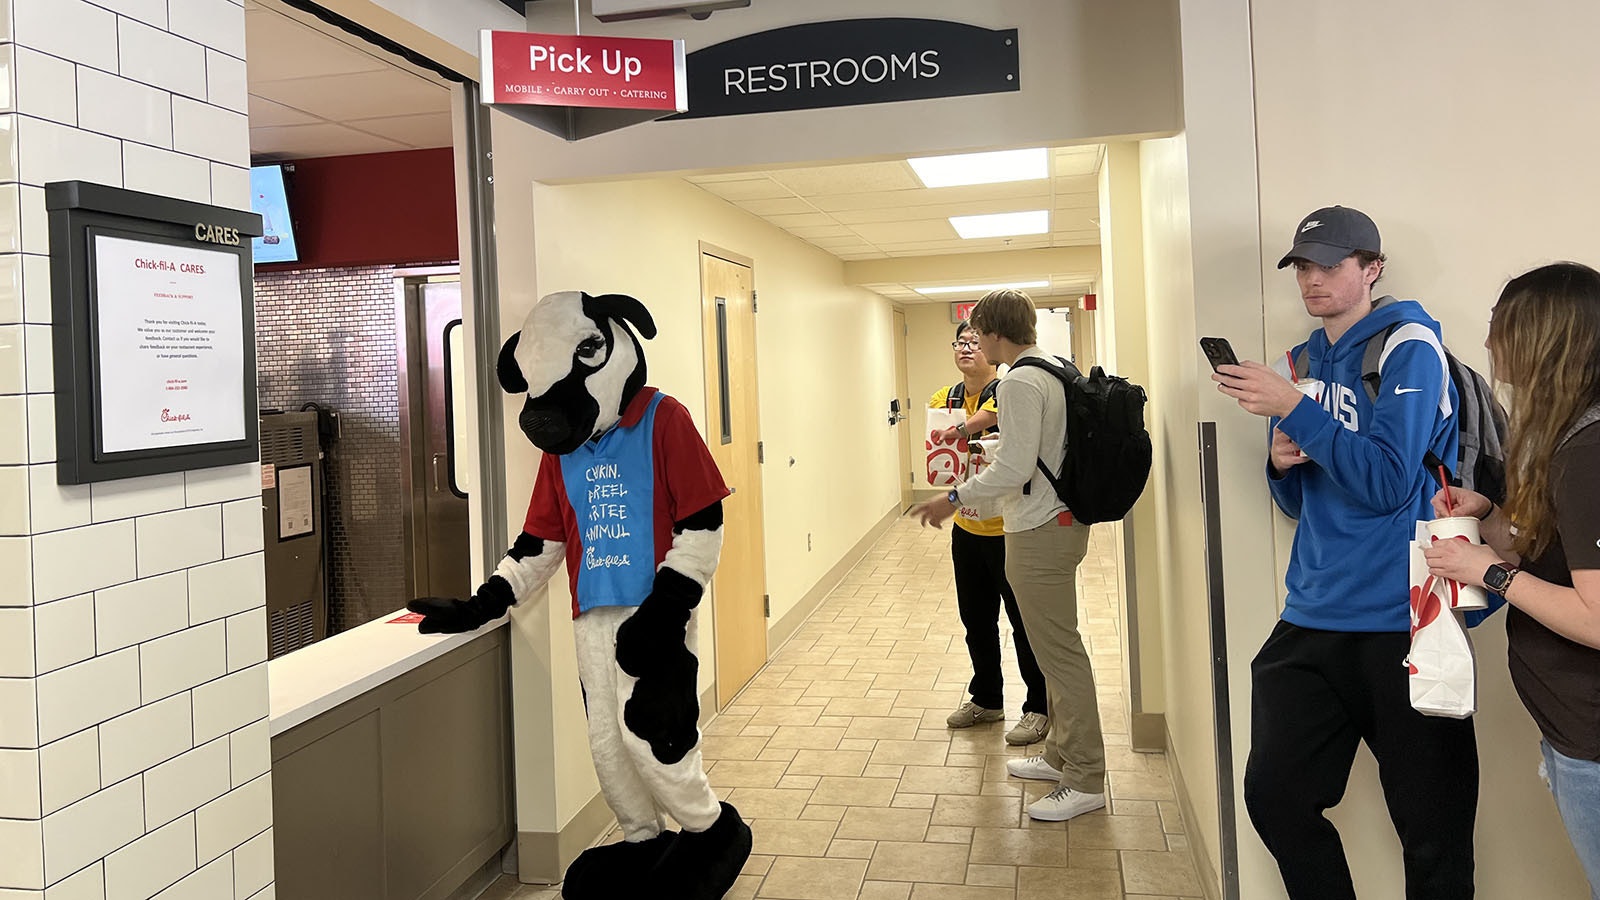 The Chick-fil-A cow mascot was on hand at the University of Wyoming Union Thursday, encouraging people to eat at the newly-opened restaurant there.